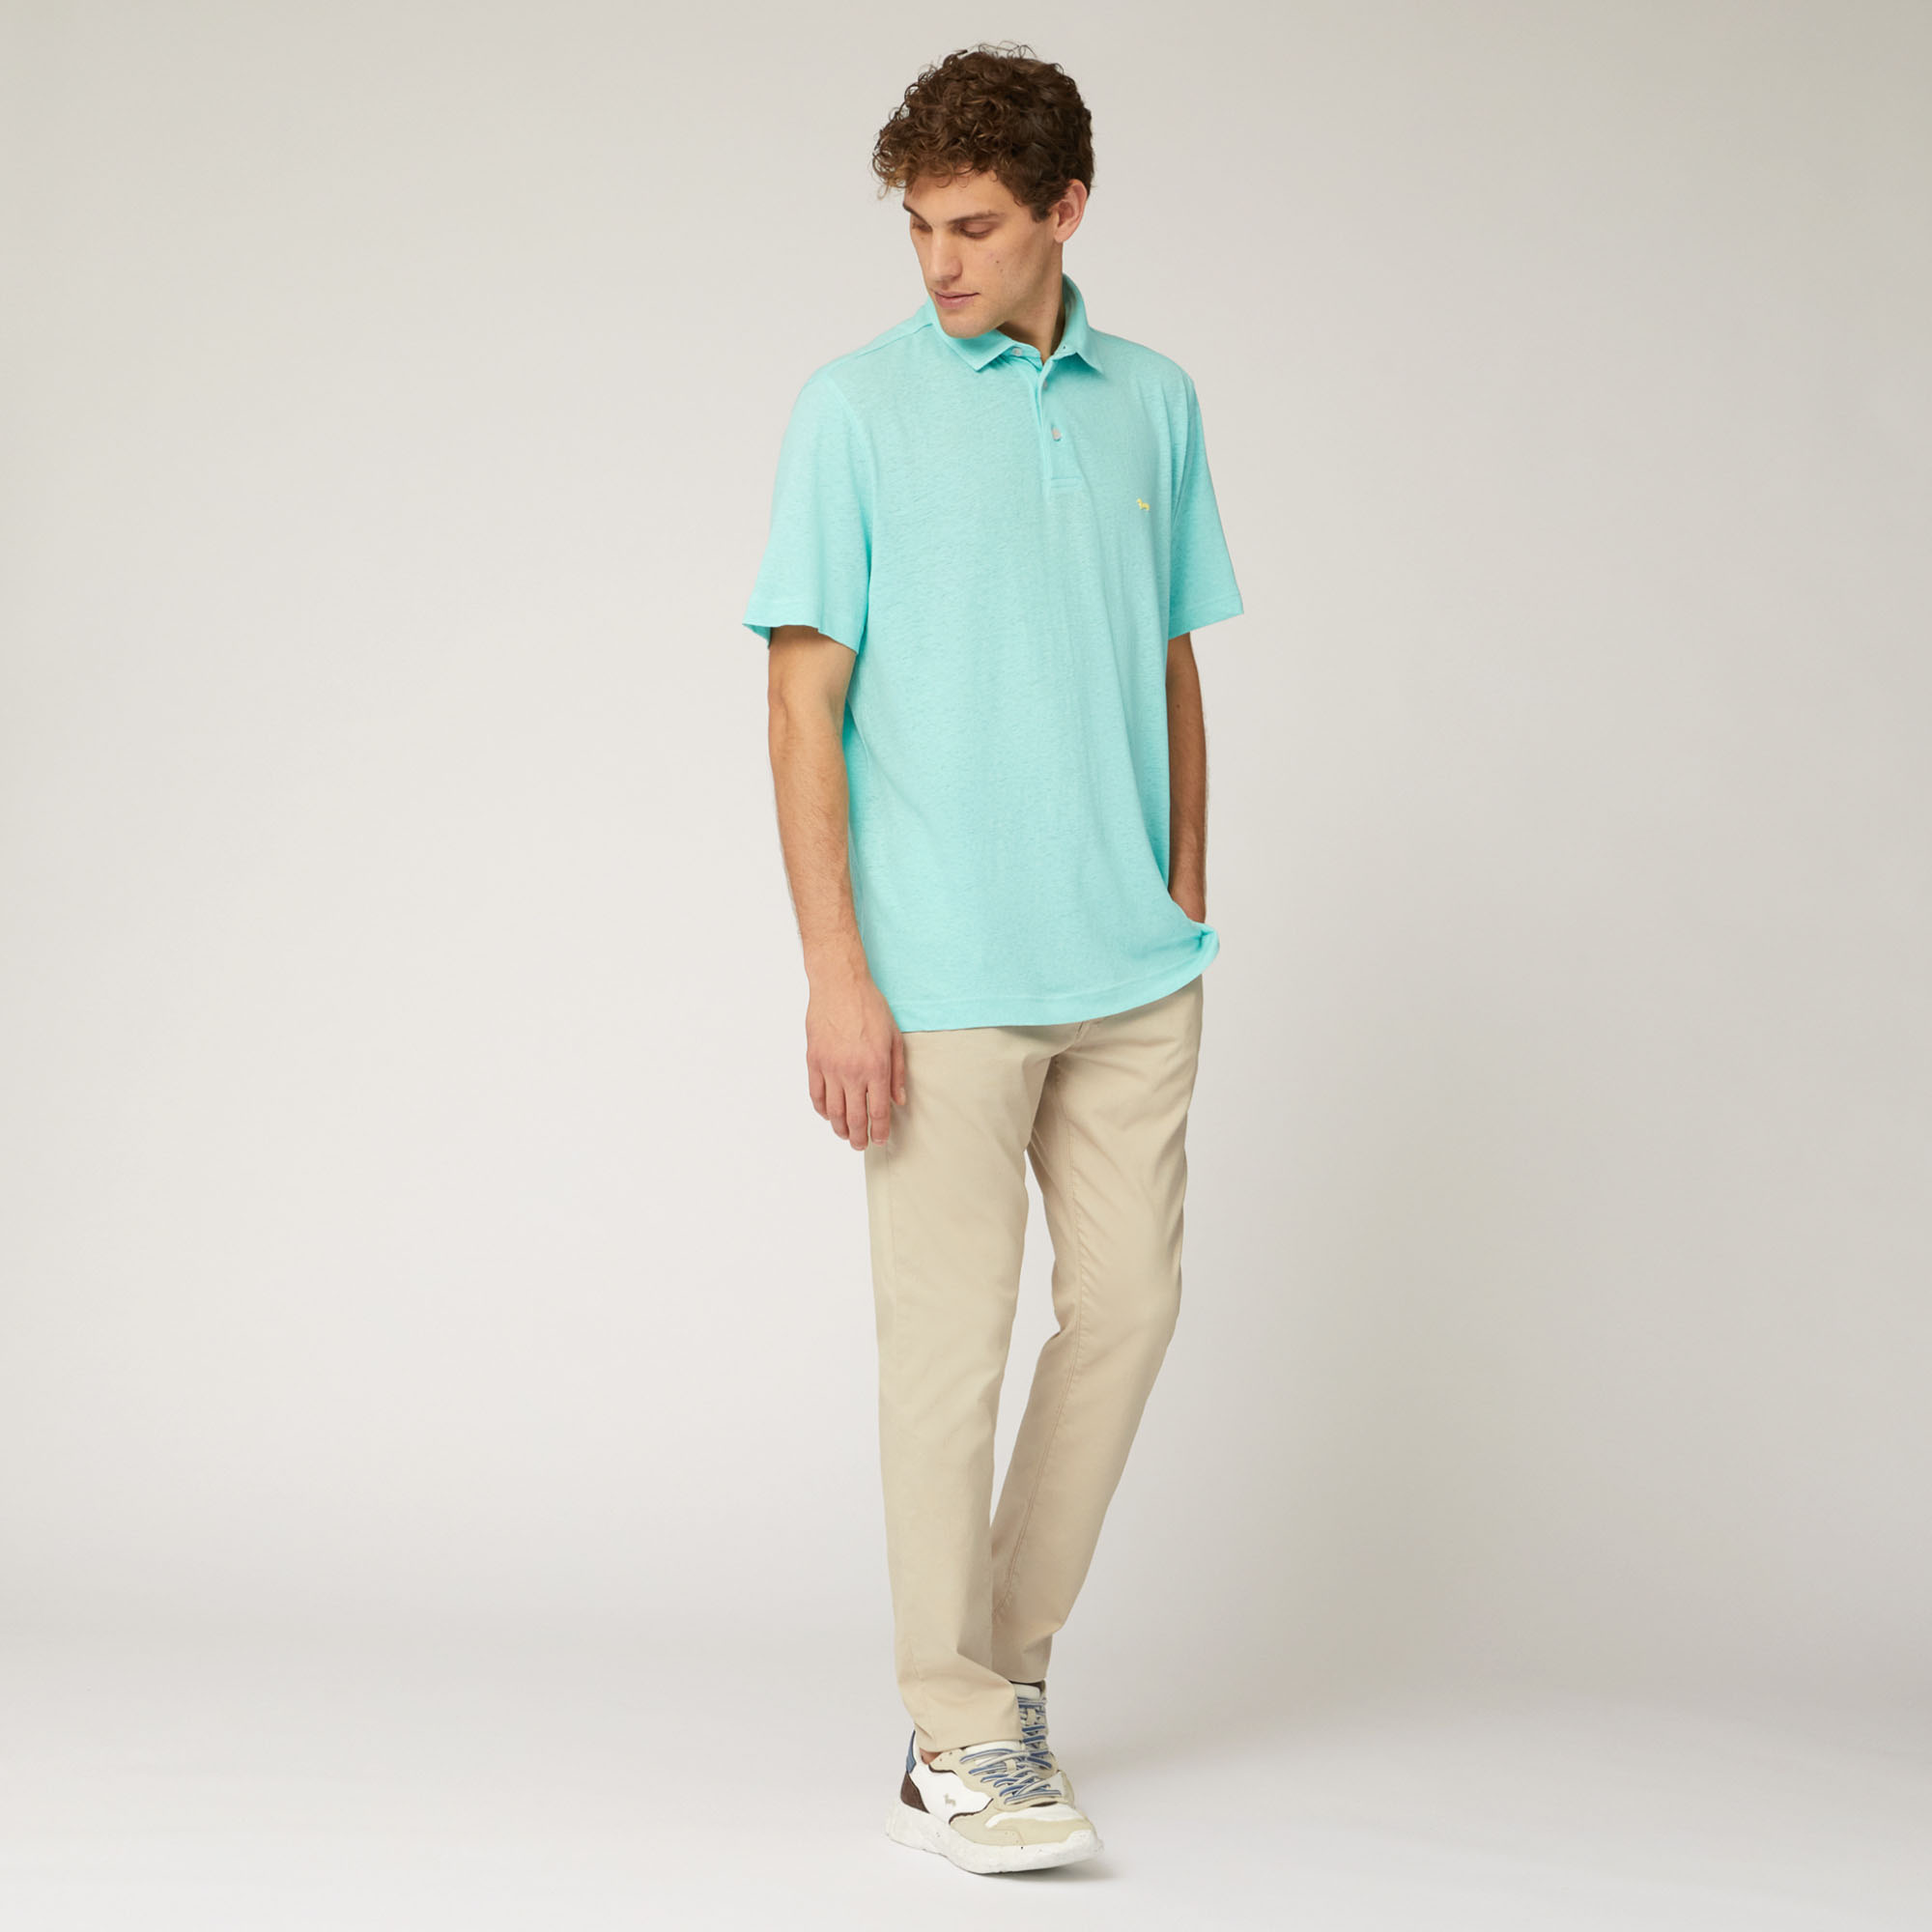 Cotton and Linen Jersey Polo, Light Blue, large image number 3